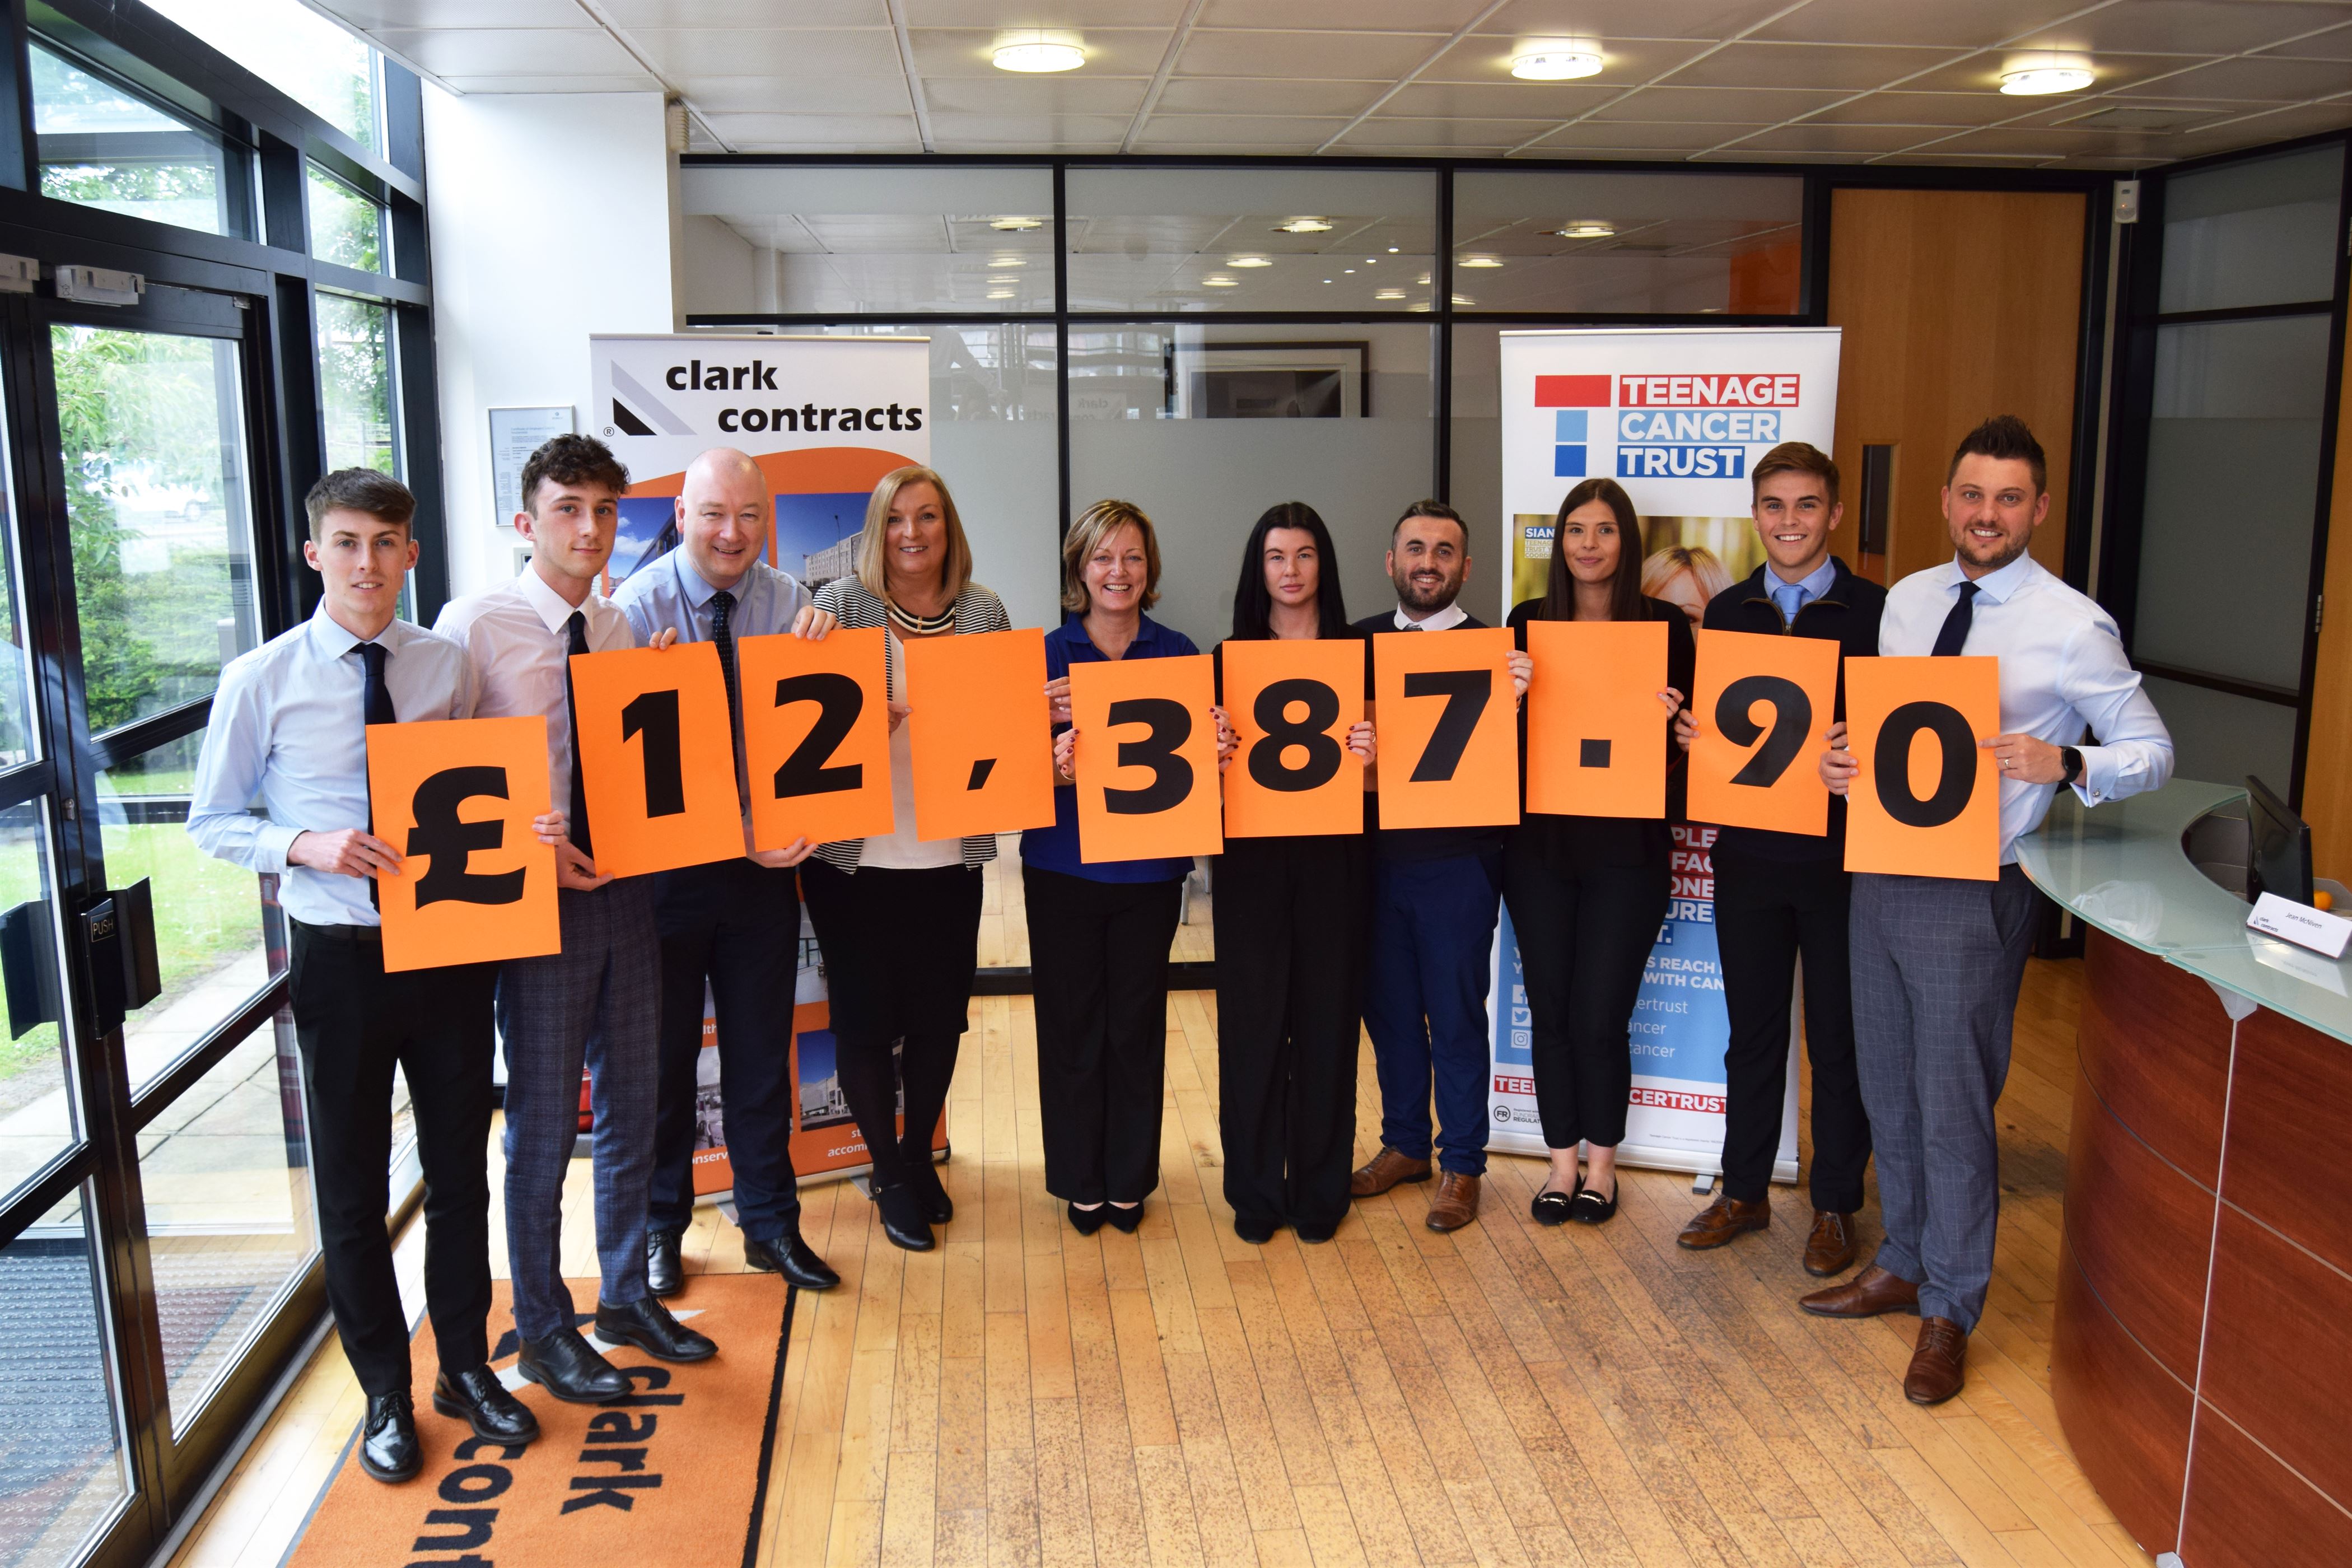 Clark Contracts raises over £12,000 for Teenage Cancer Trust